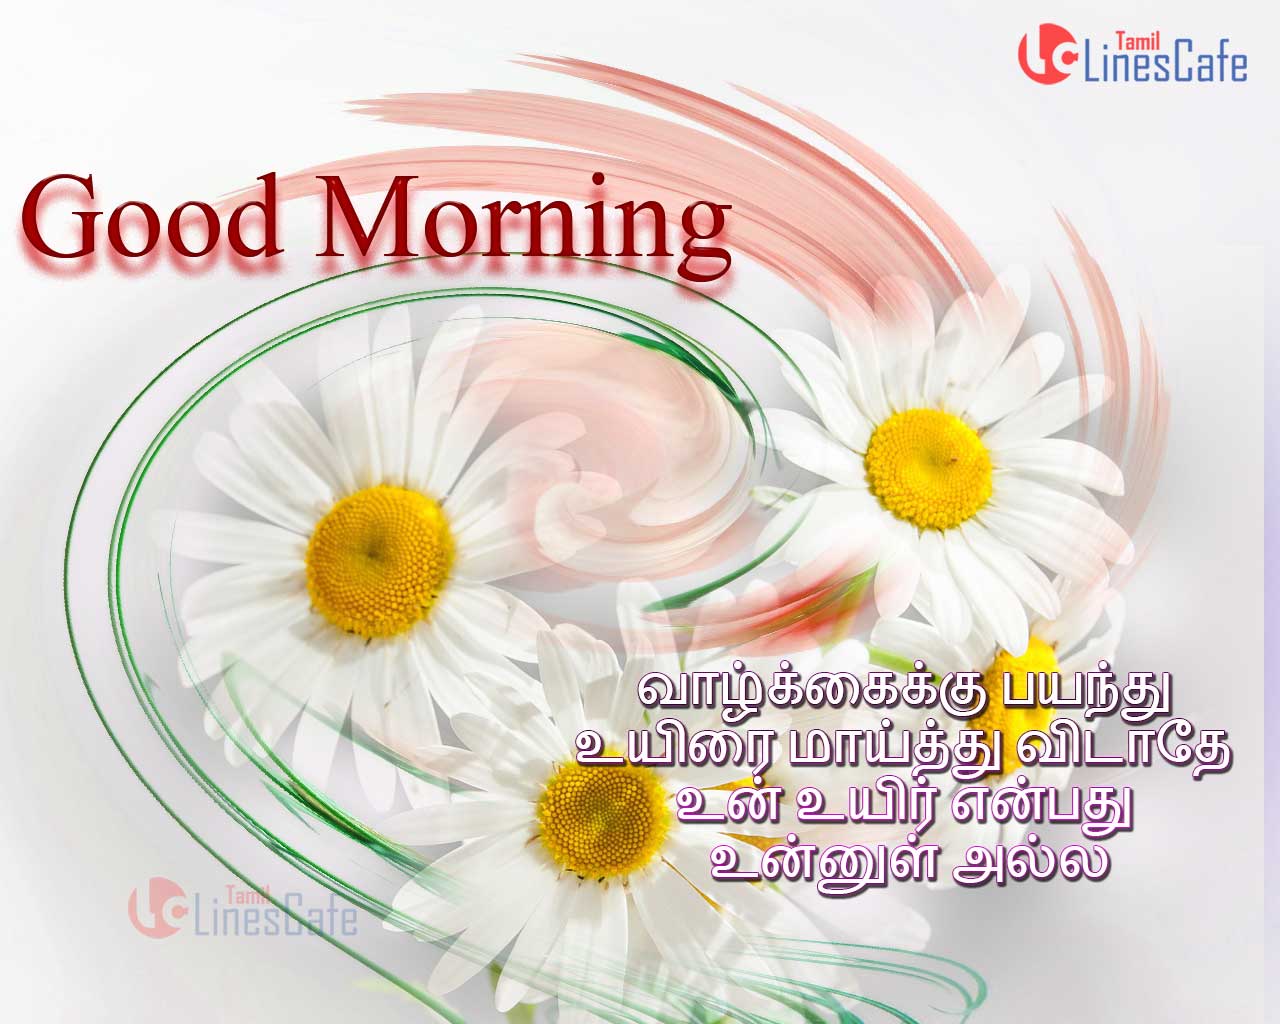 Tamil Good Morning Messages And Poems For Lovers And Friends With Poems And Quotes